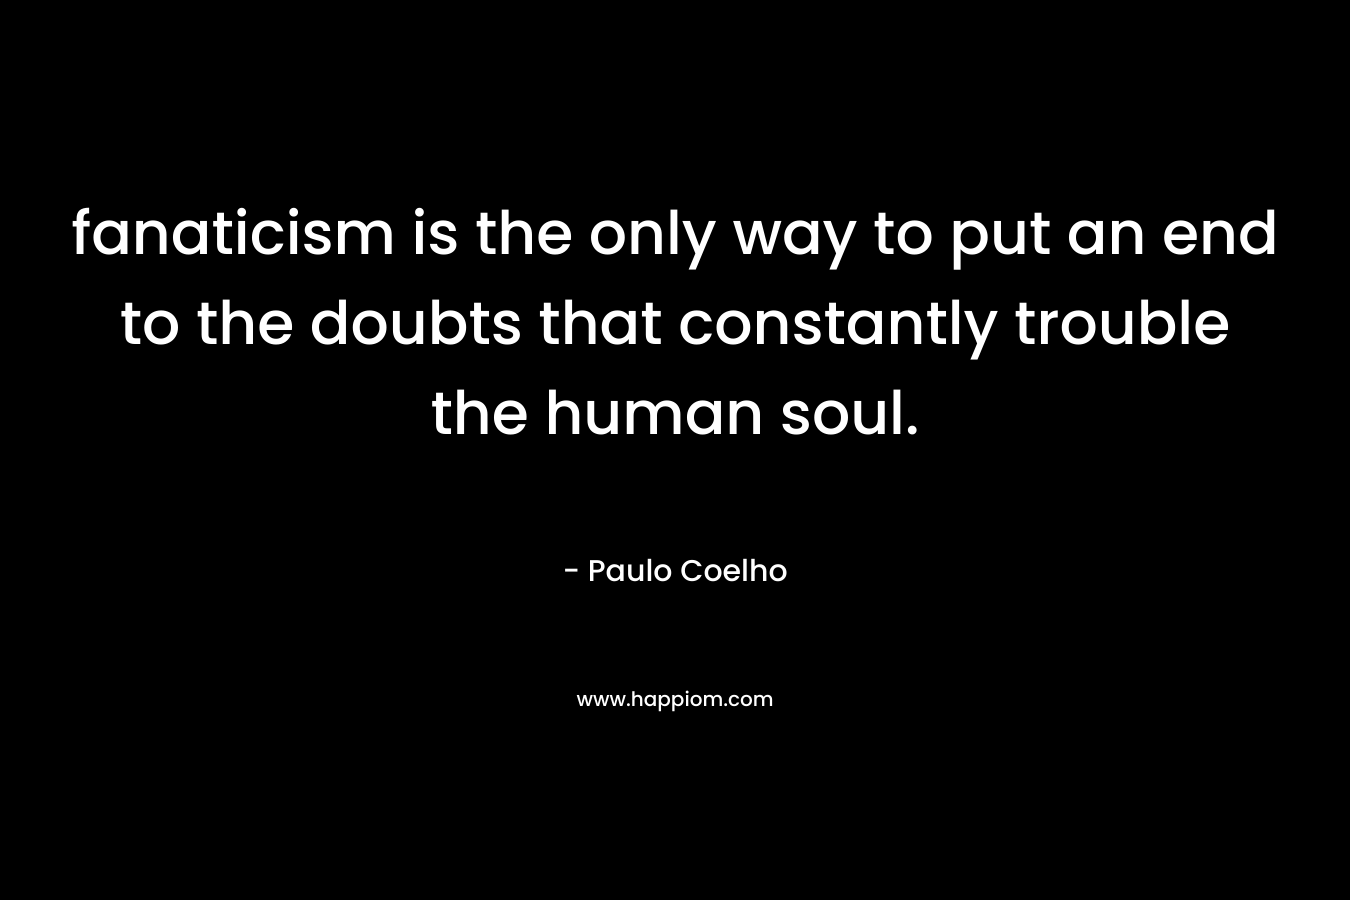 fanaticism is the only way to put an end to the doubts that constantly trouble the human soul.